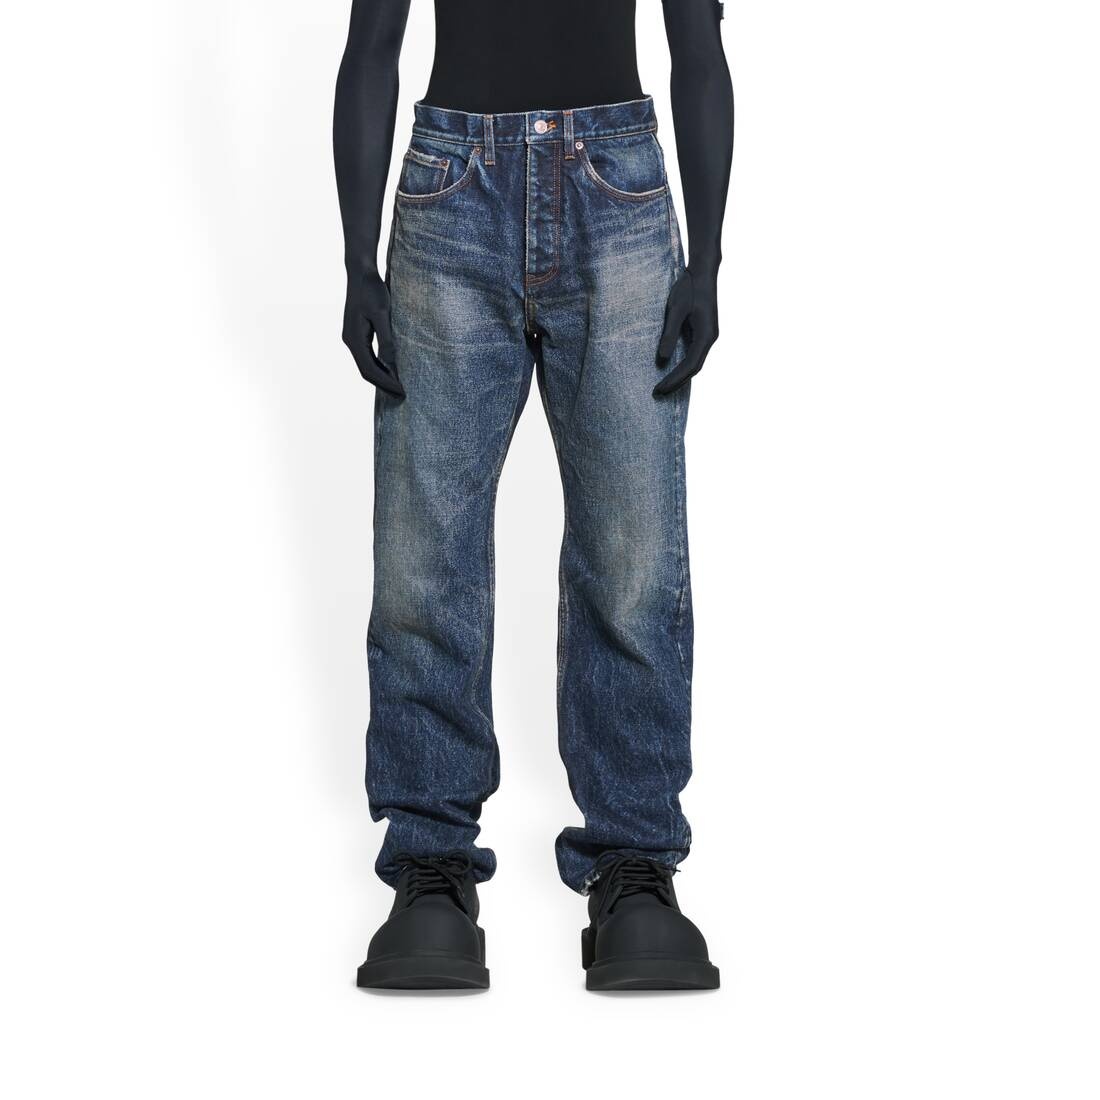 Men's Relaxed Jeans in Navy Blue - 5